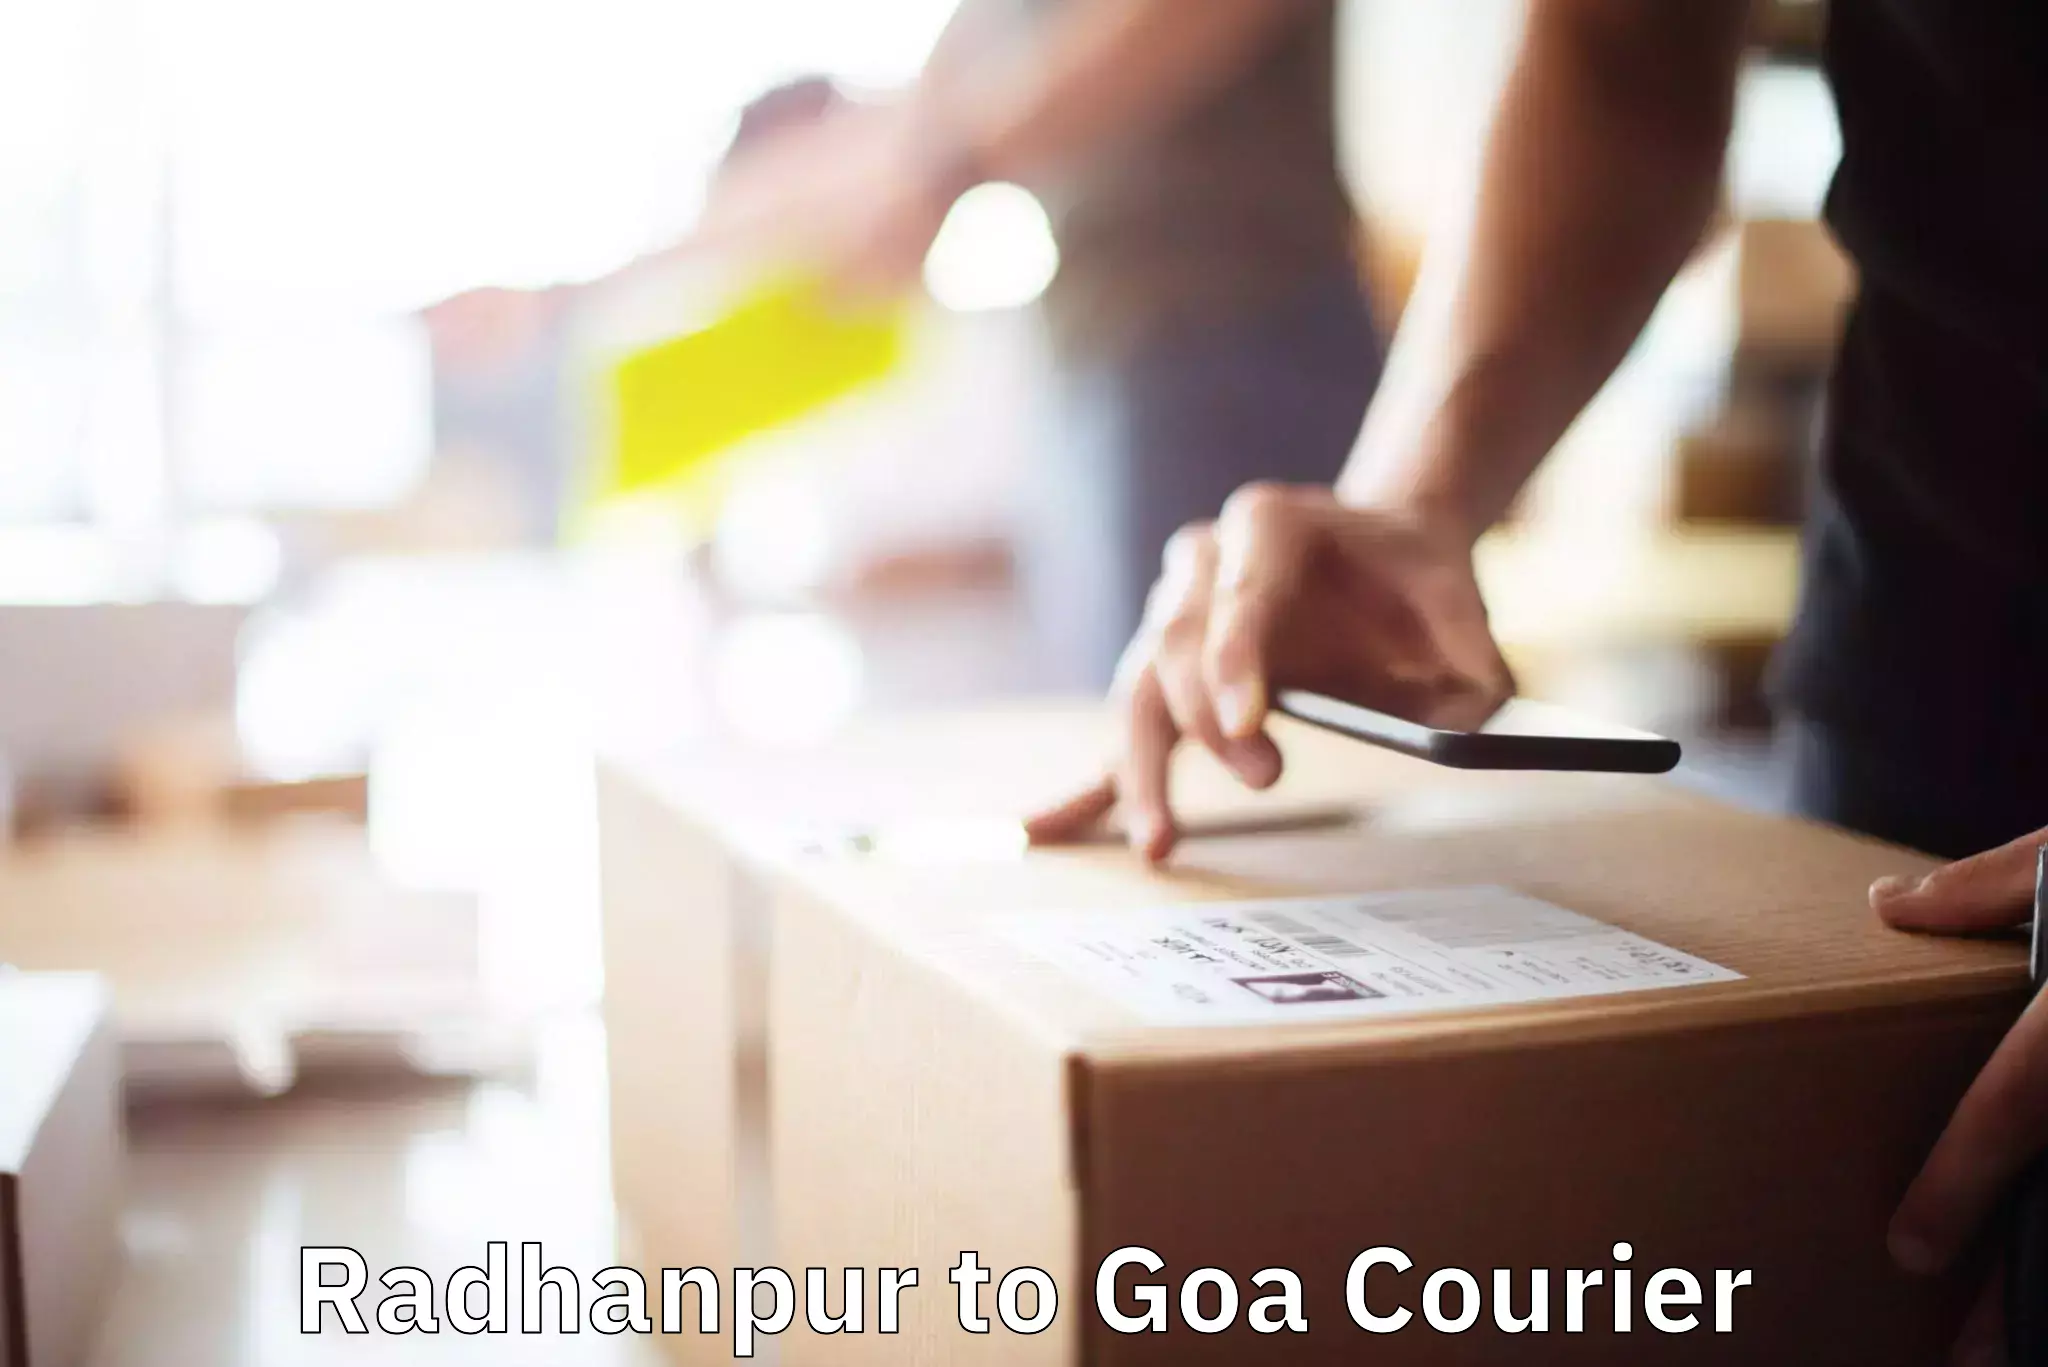 Quality relocation services in Radhanpur to Panaji